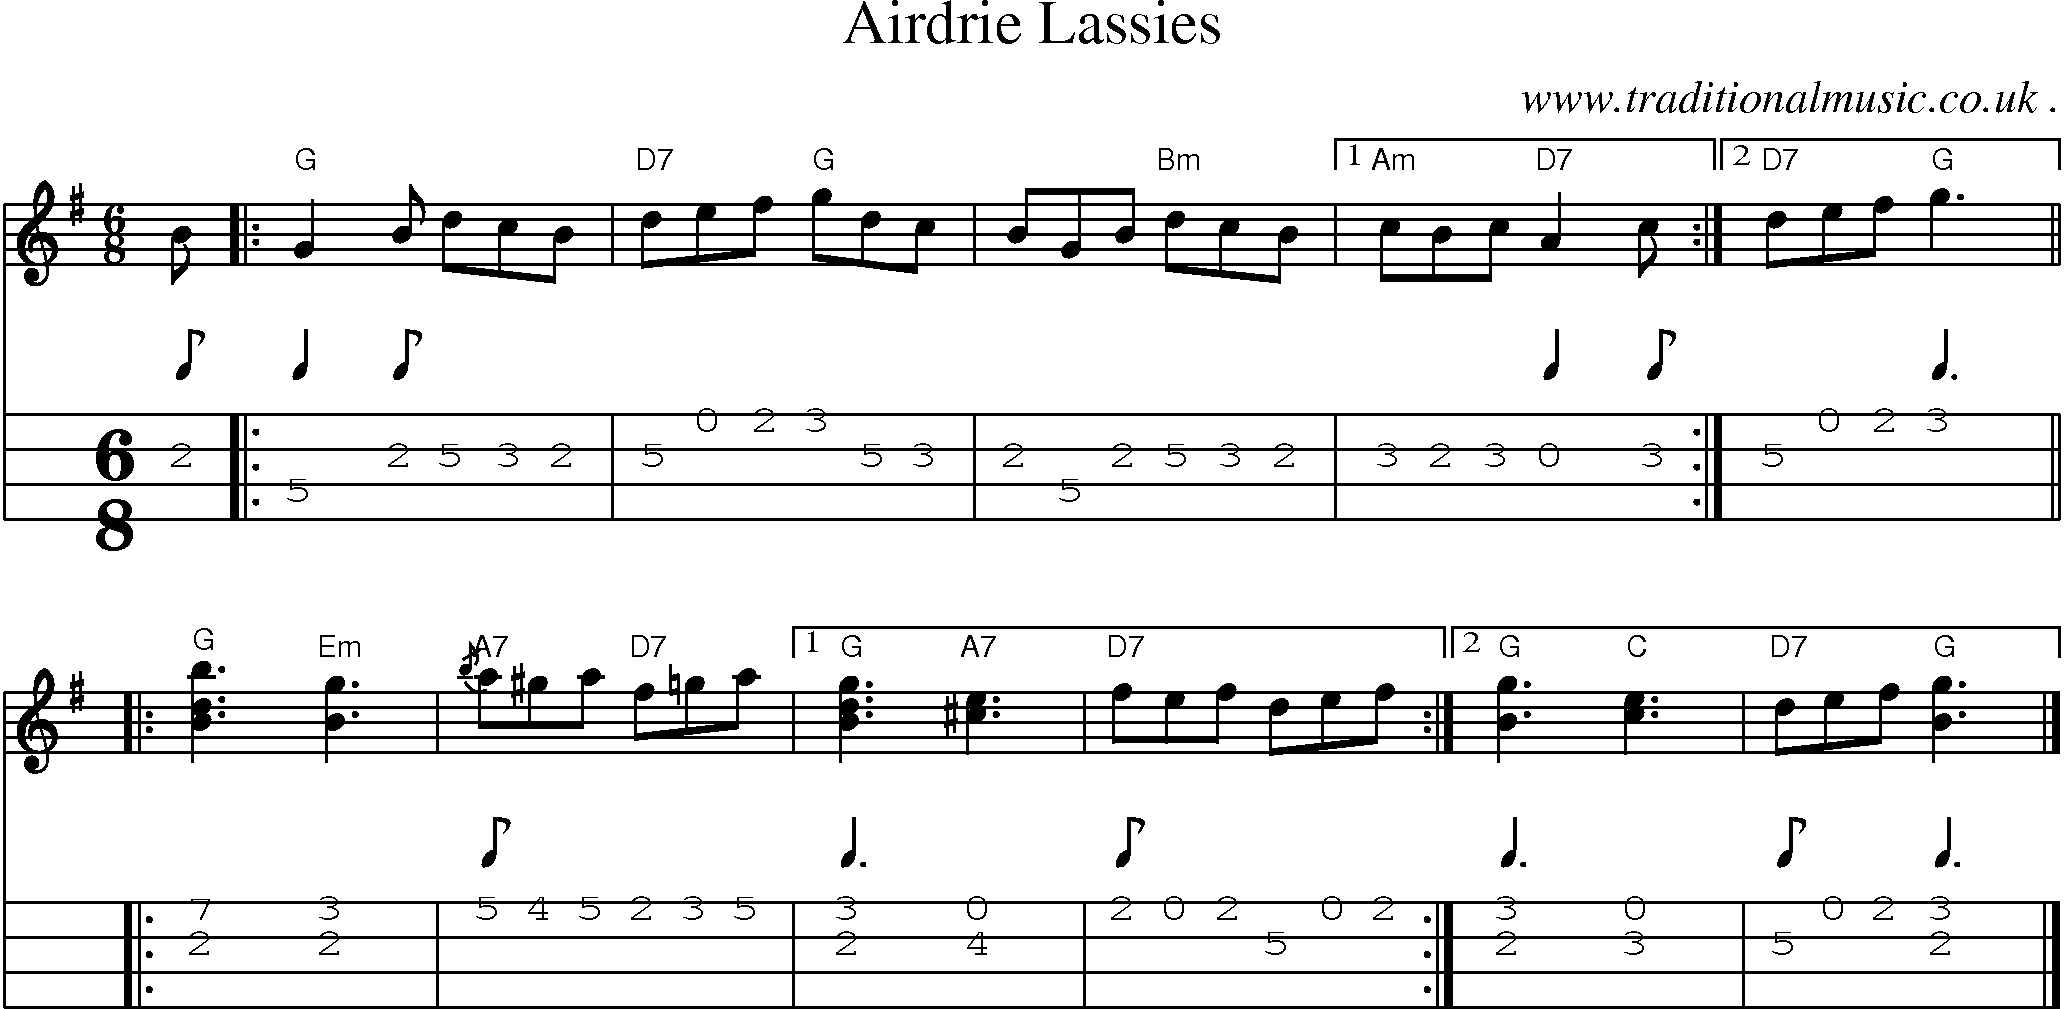 Sheet-music  score, Chords and Mandolin Tabs for Airdrie Lassies